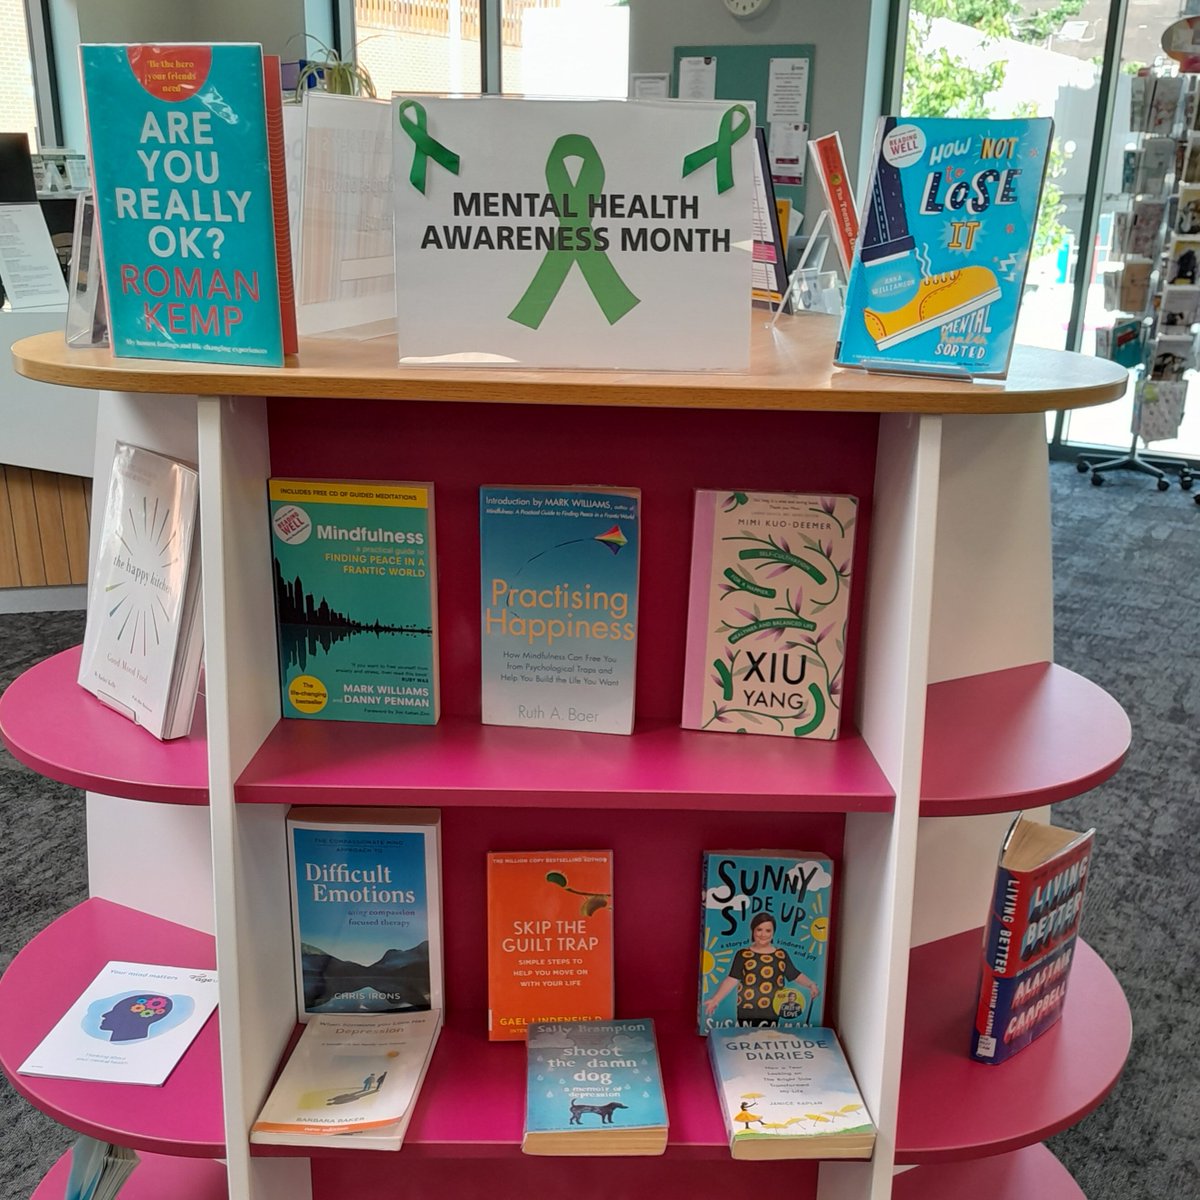 Mental Health Awareness Week runs from 13 to 19 May 2024. Find out more about wellbeing and mindfulness at your local library.